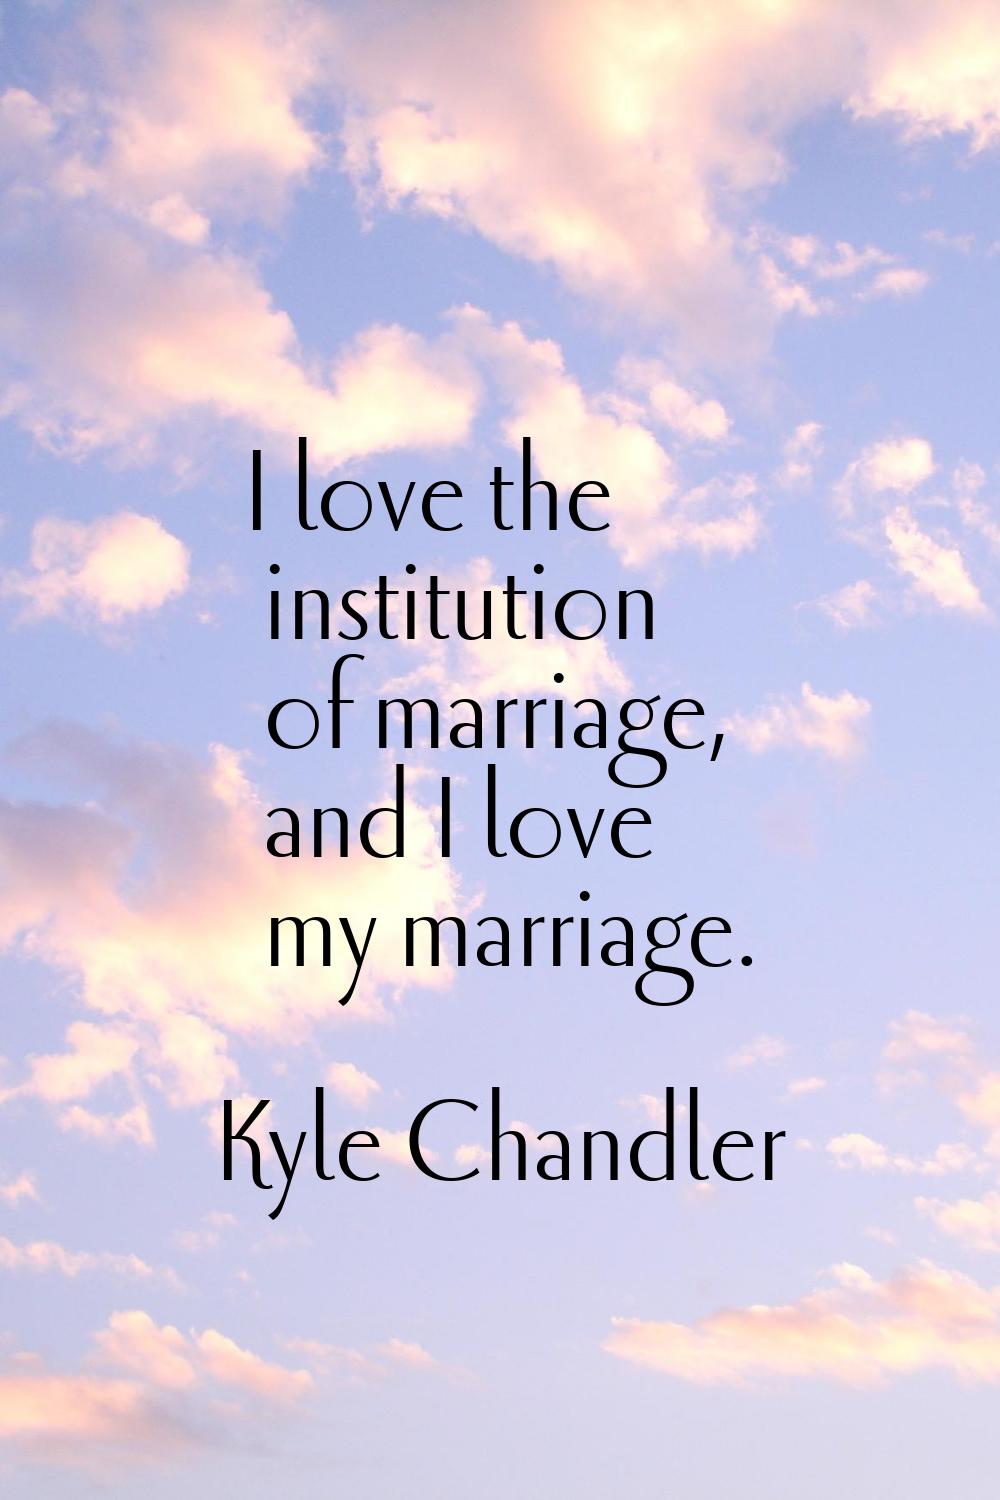 I love the institution of marriage, and I love my marriage.